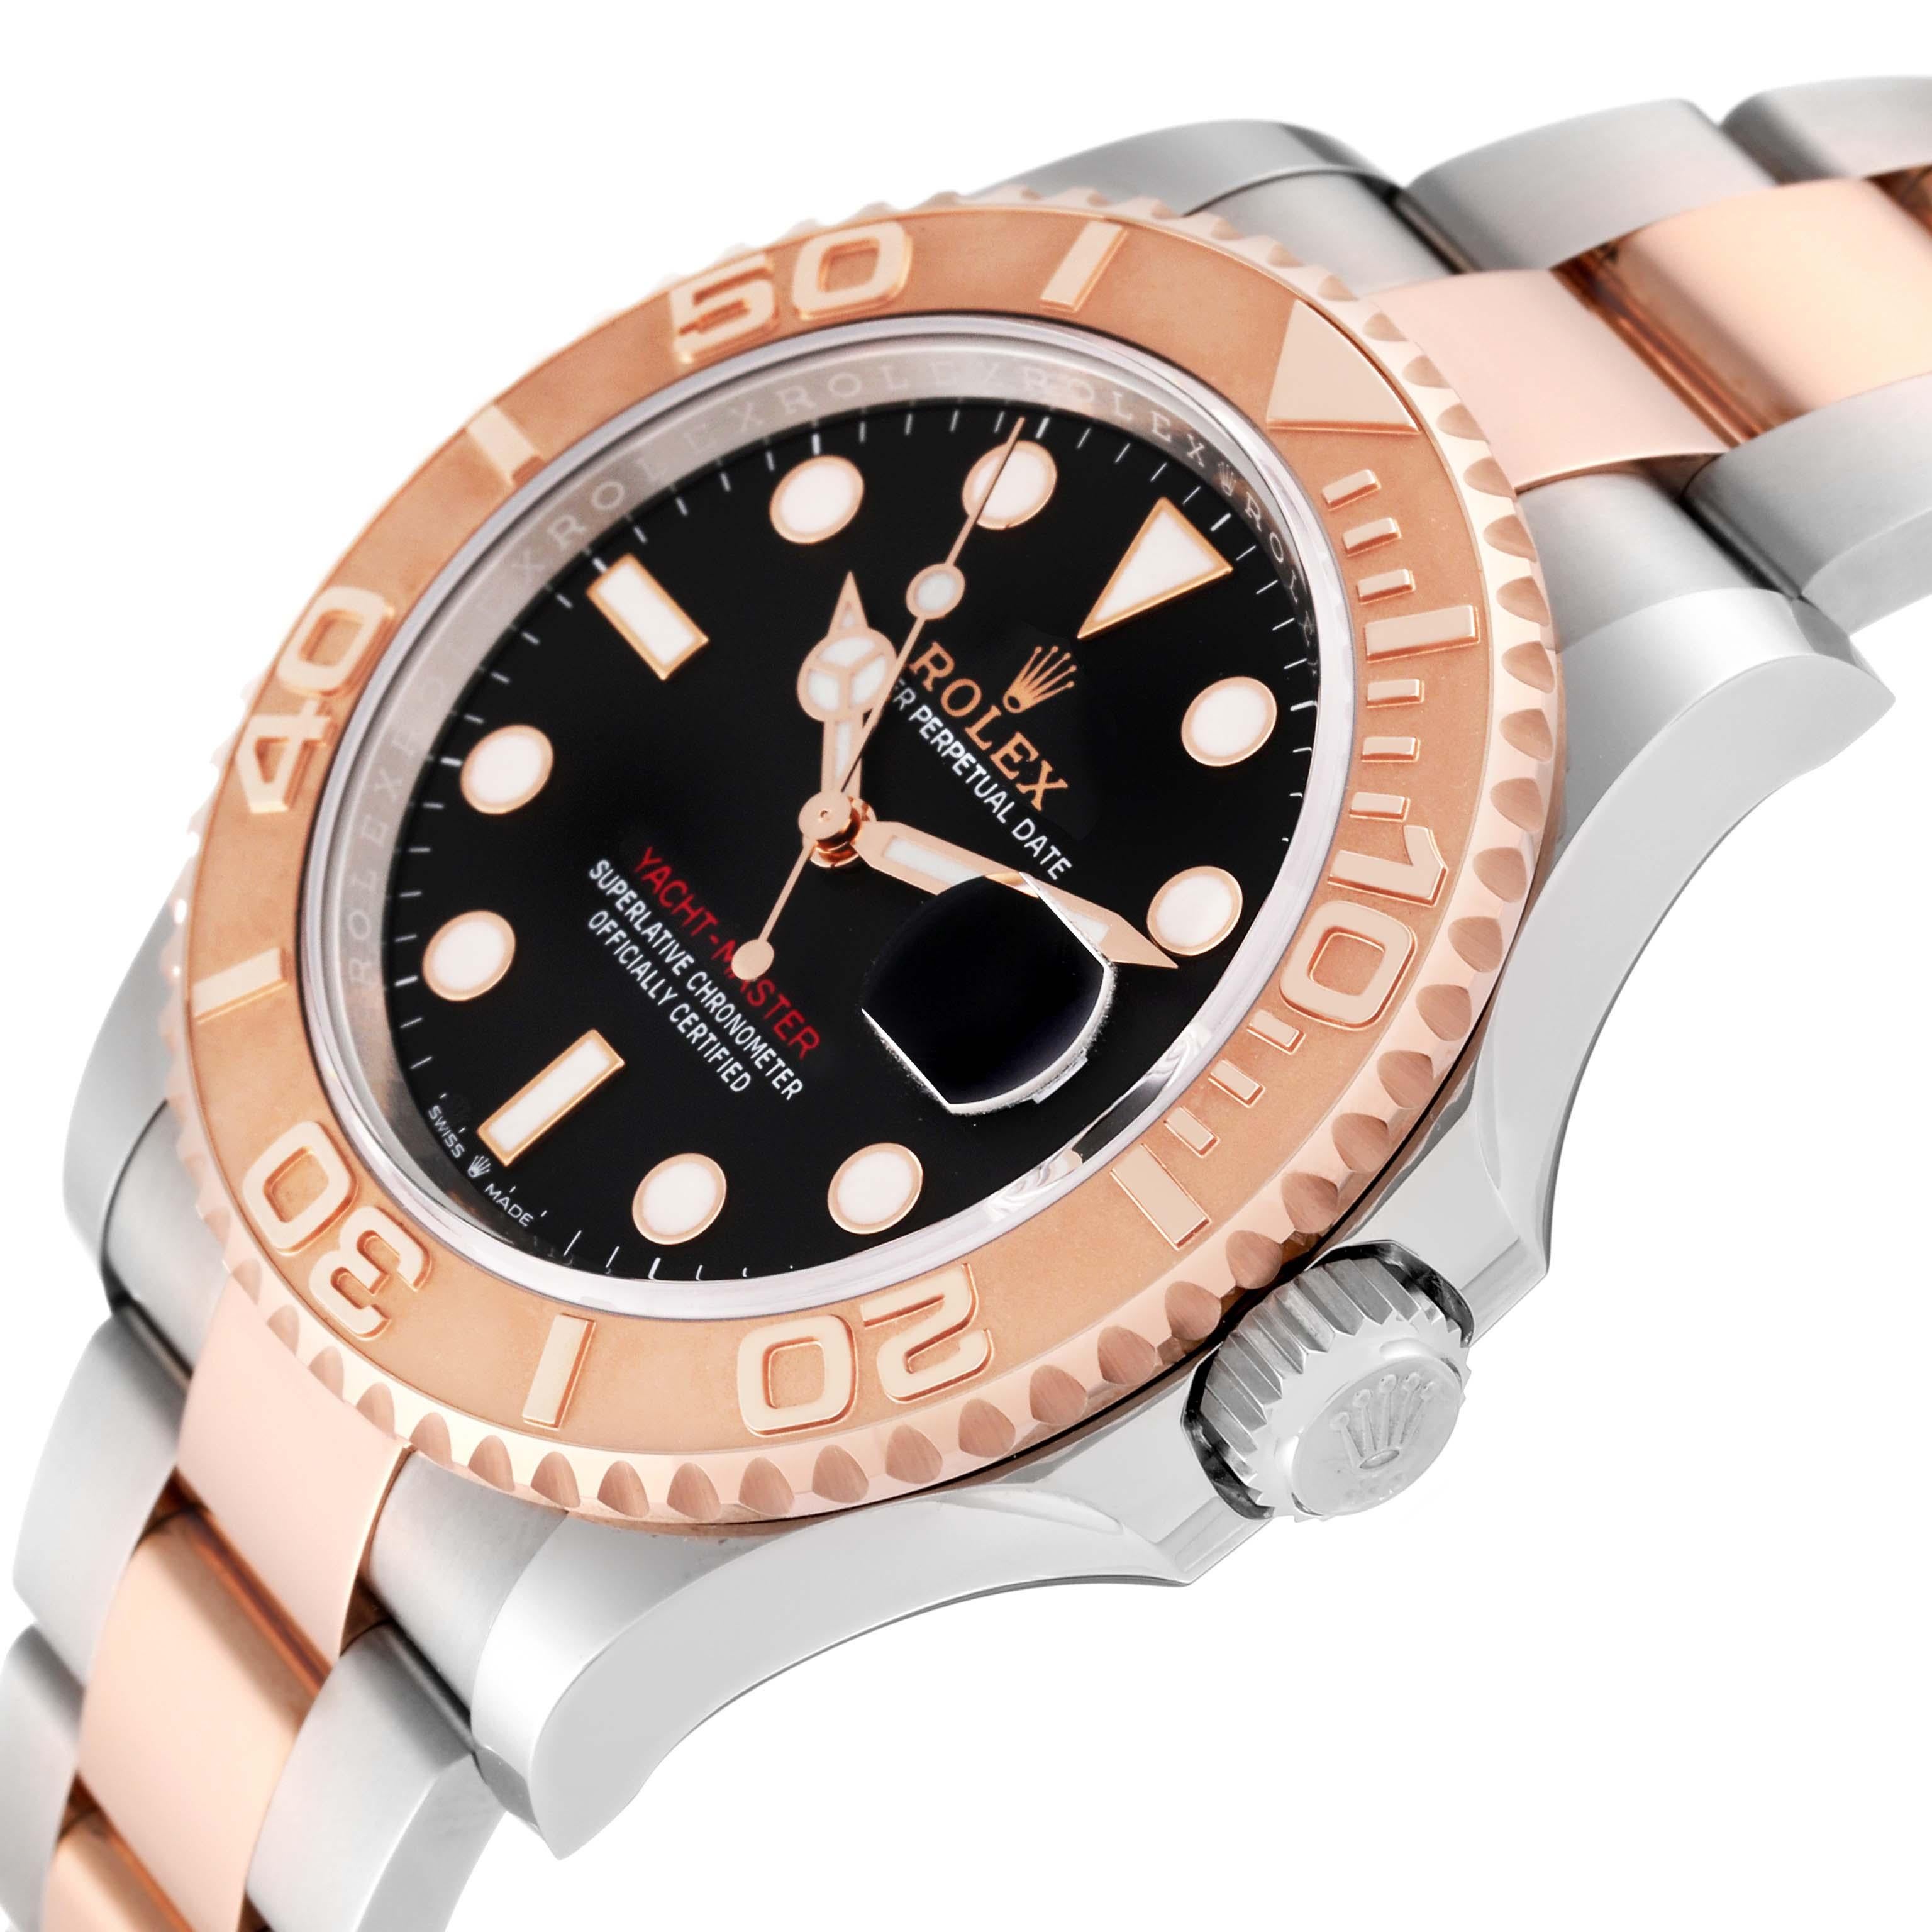 Rolex Yachtmaster Rose Gold Steel Rolesor Mens Watch 126621 Box Card For Sale 1